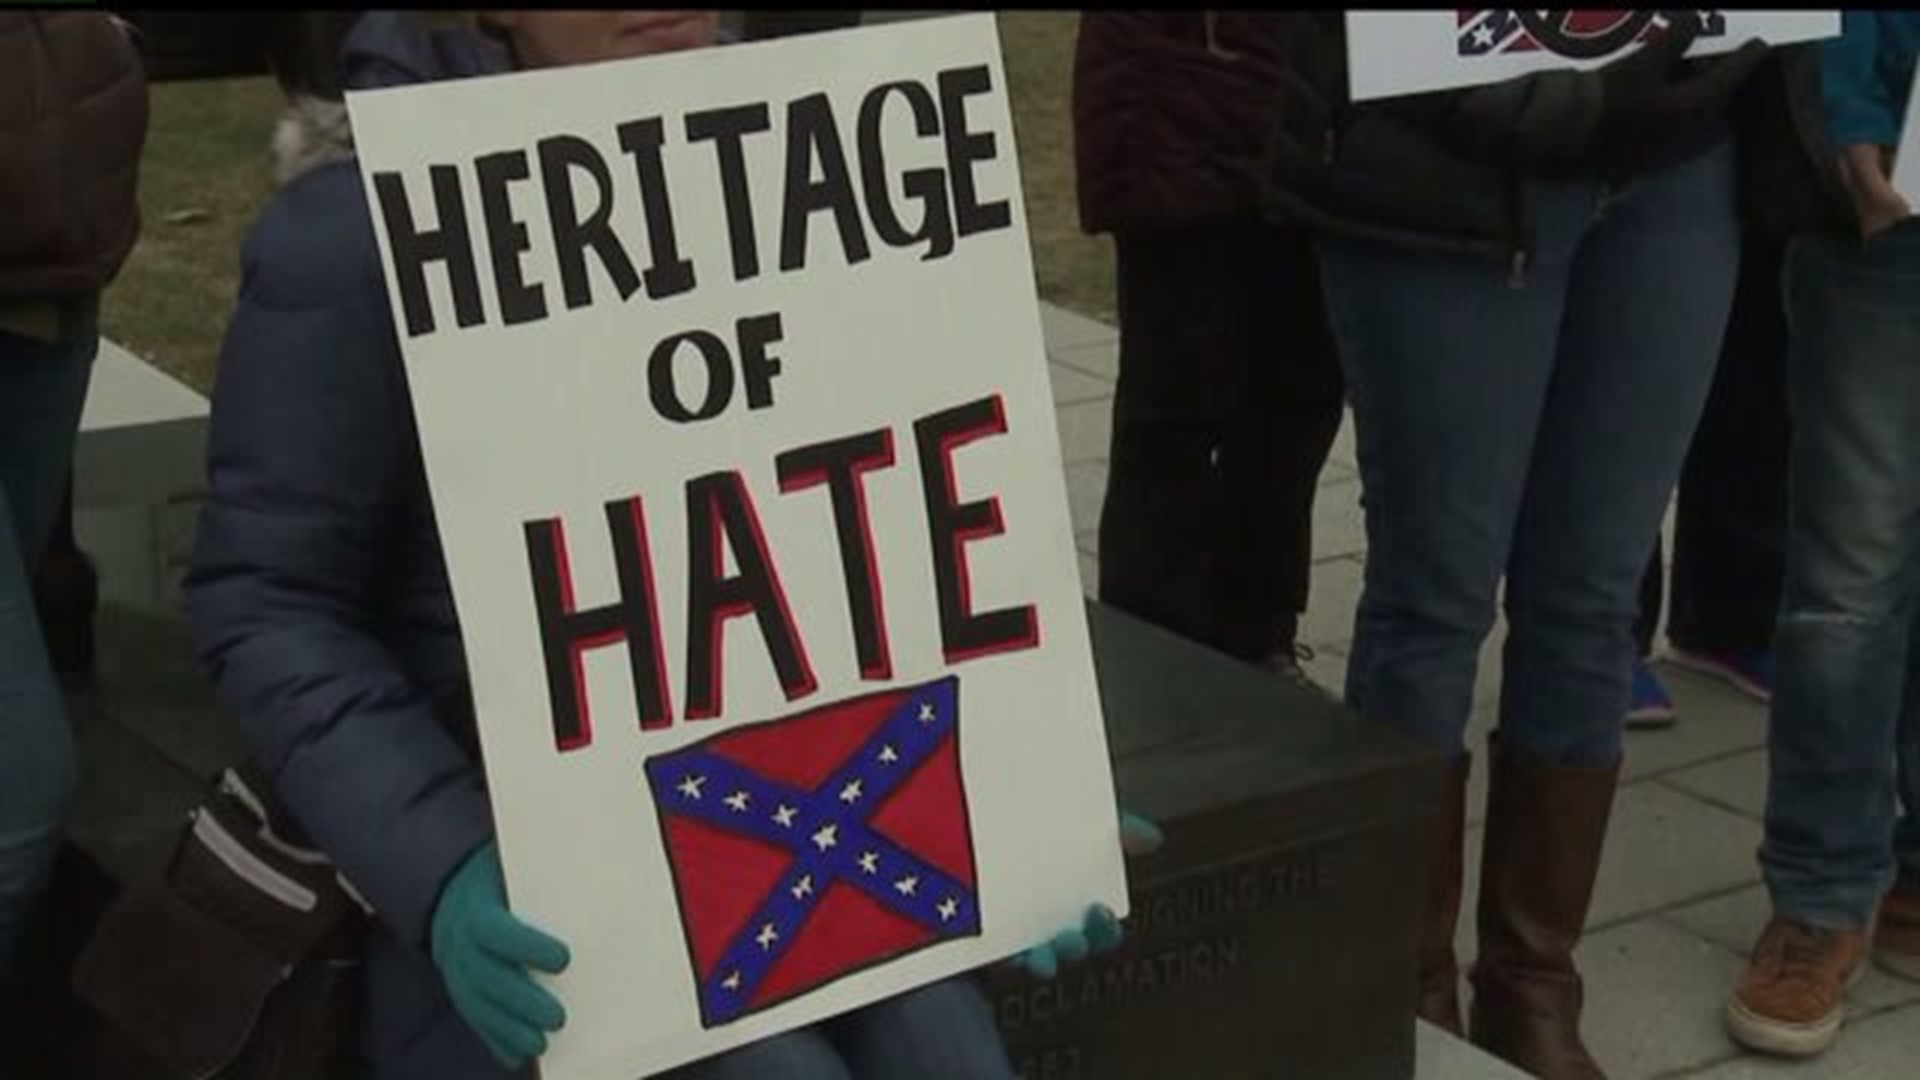 Groups have war of words over Confederate flag in Gettysburg